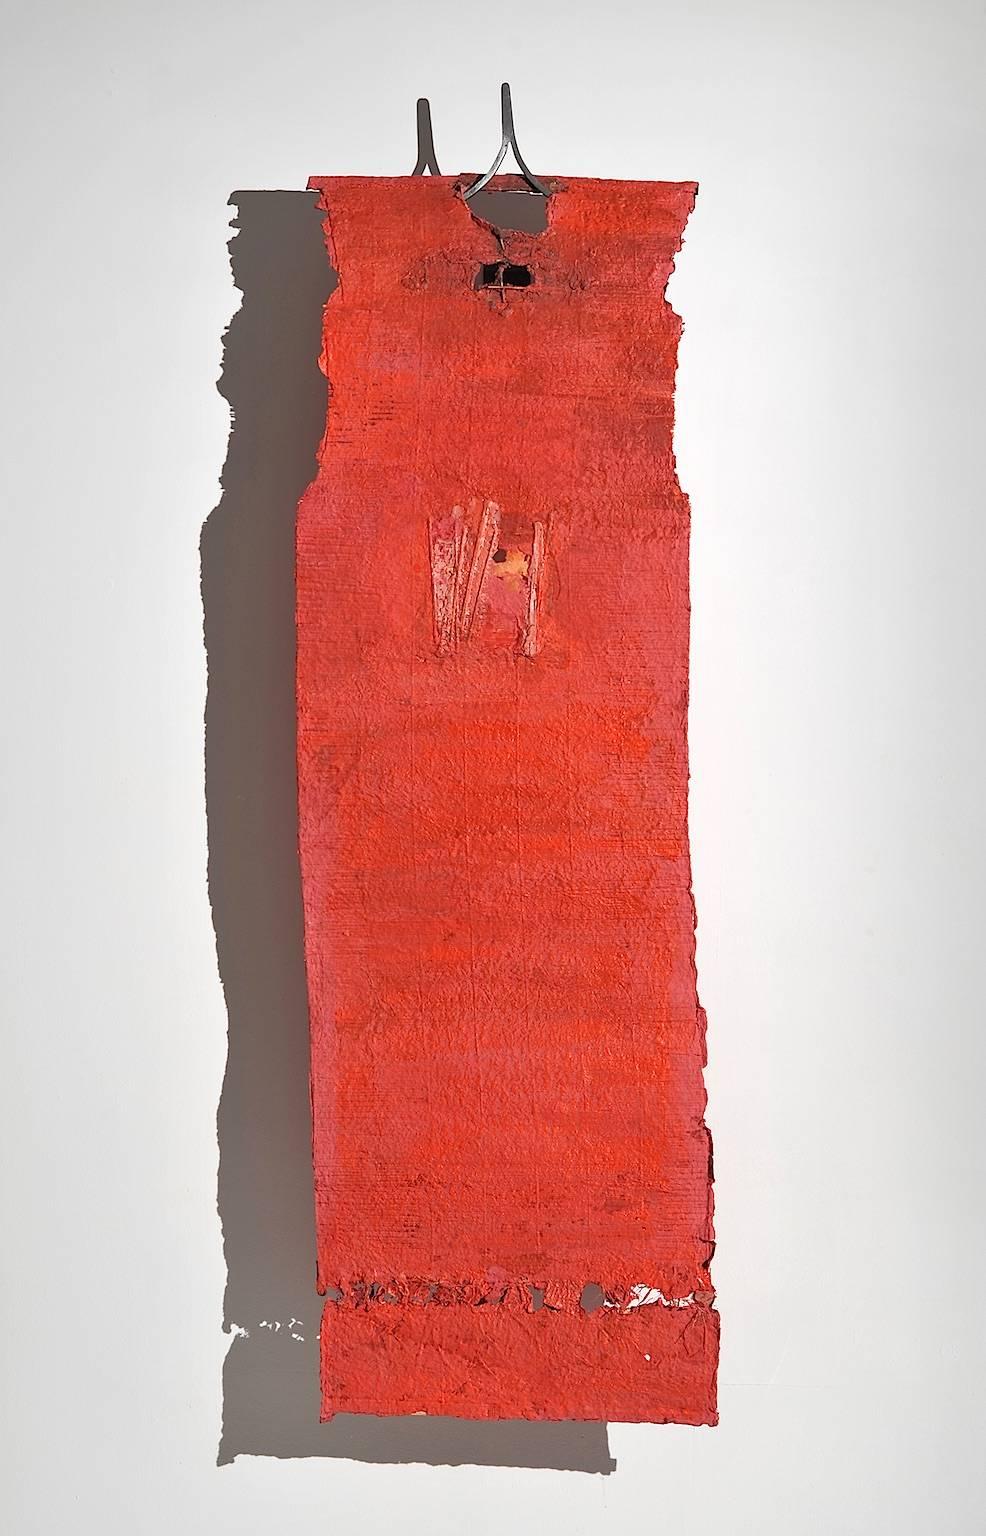 "Moving Inside Out" Abstract, Hanging Wall Relief Sculpture, Handmade Paper